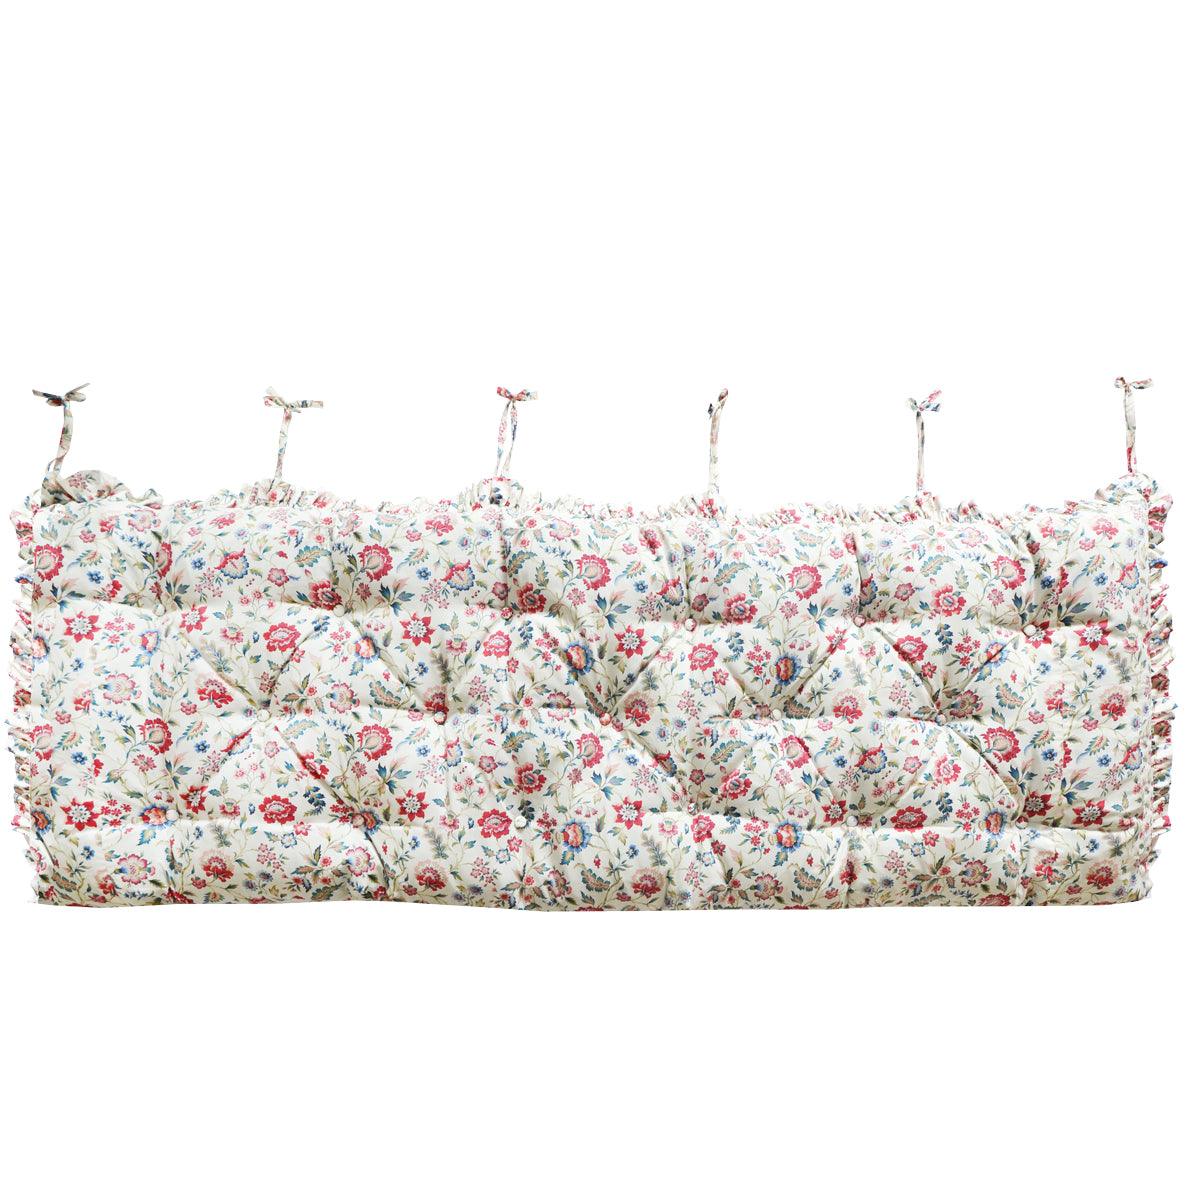 Hanging Headboard made with Liberty Fabric EVA BELLE RASPBERRY - Coco & Wolf